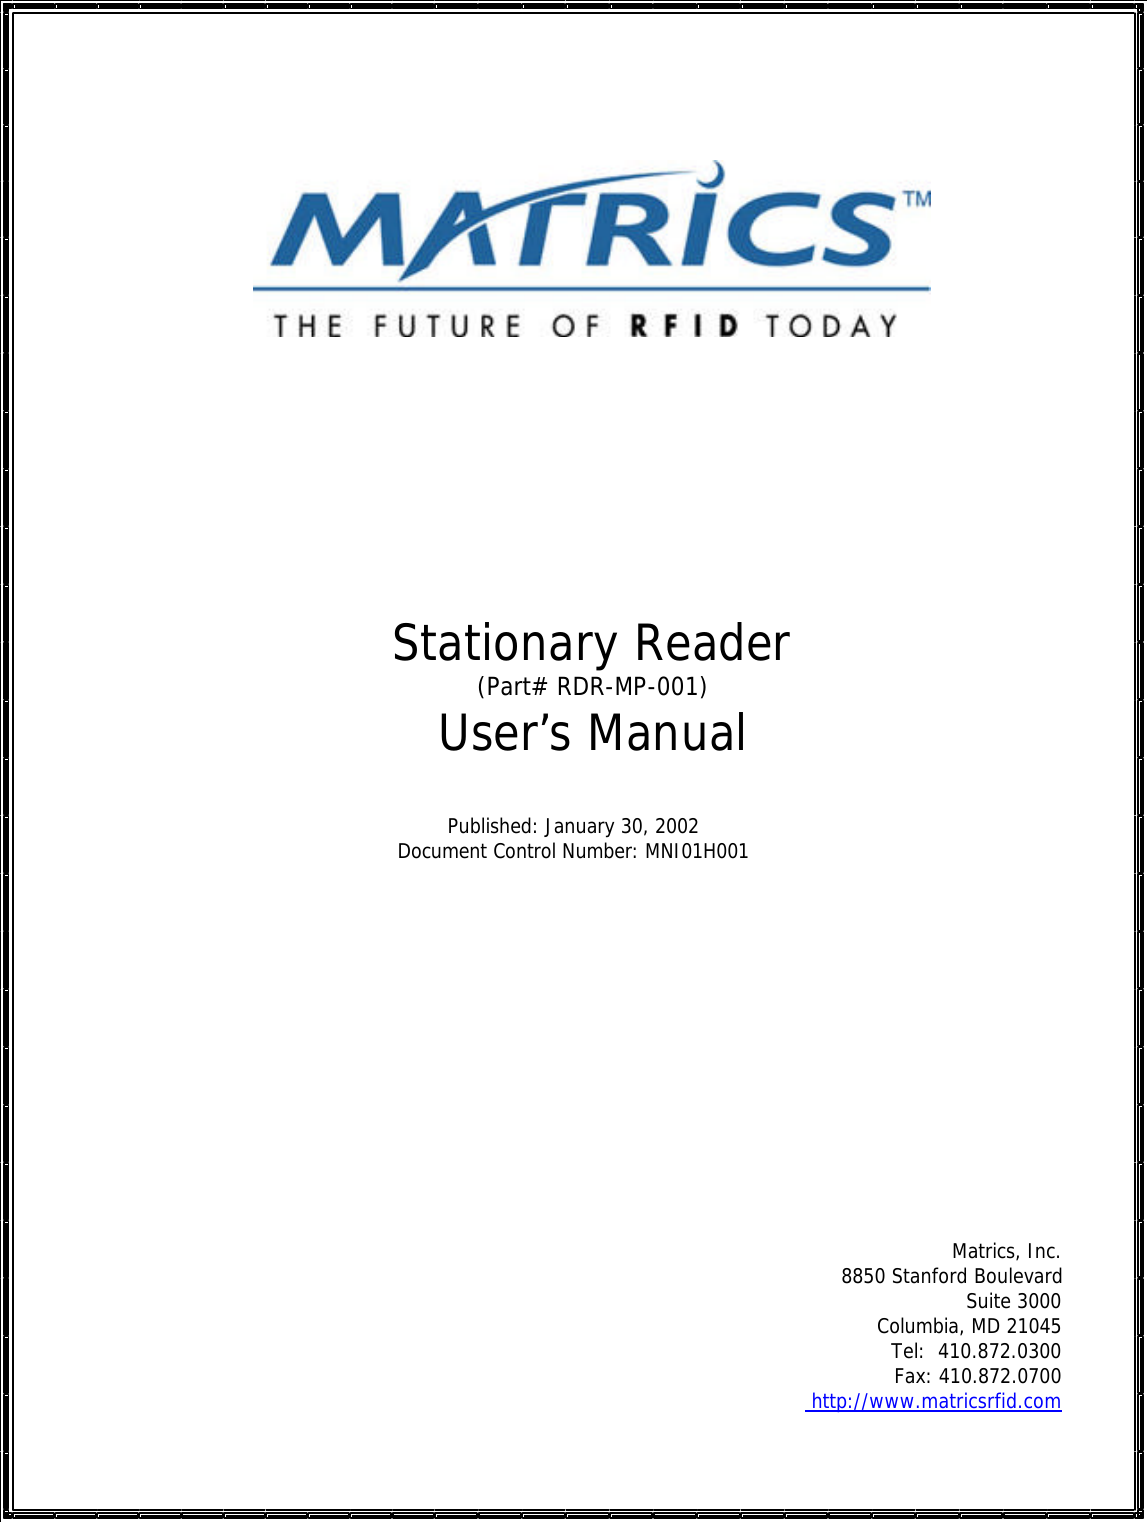           Stationary Reader (Part# RDR-MP-001) User’s Manual   Published: January 30, 2002 Document Control Number: MNI01H001                Matrics, Inc. 8850 Stanford Boulevard Suite 3000 Columbia, MD 21045 Tel:  410.872.0300  Fax: 410.872.0700  http://www.matricsrfid.com 